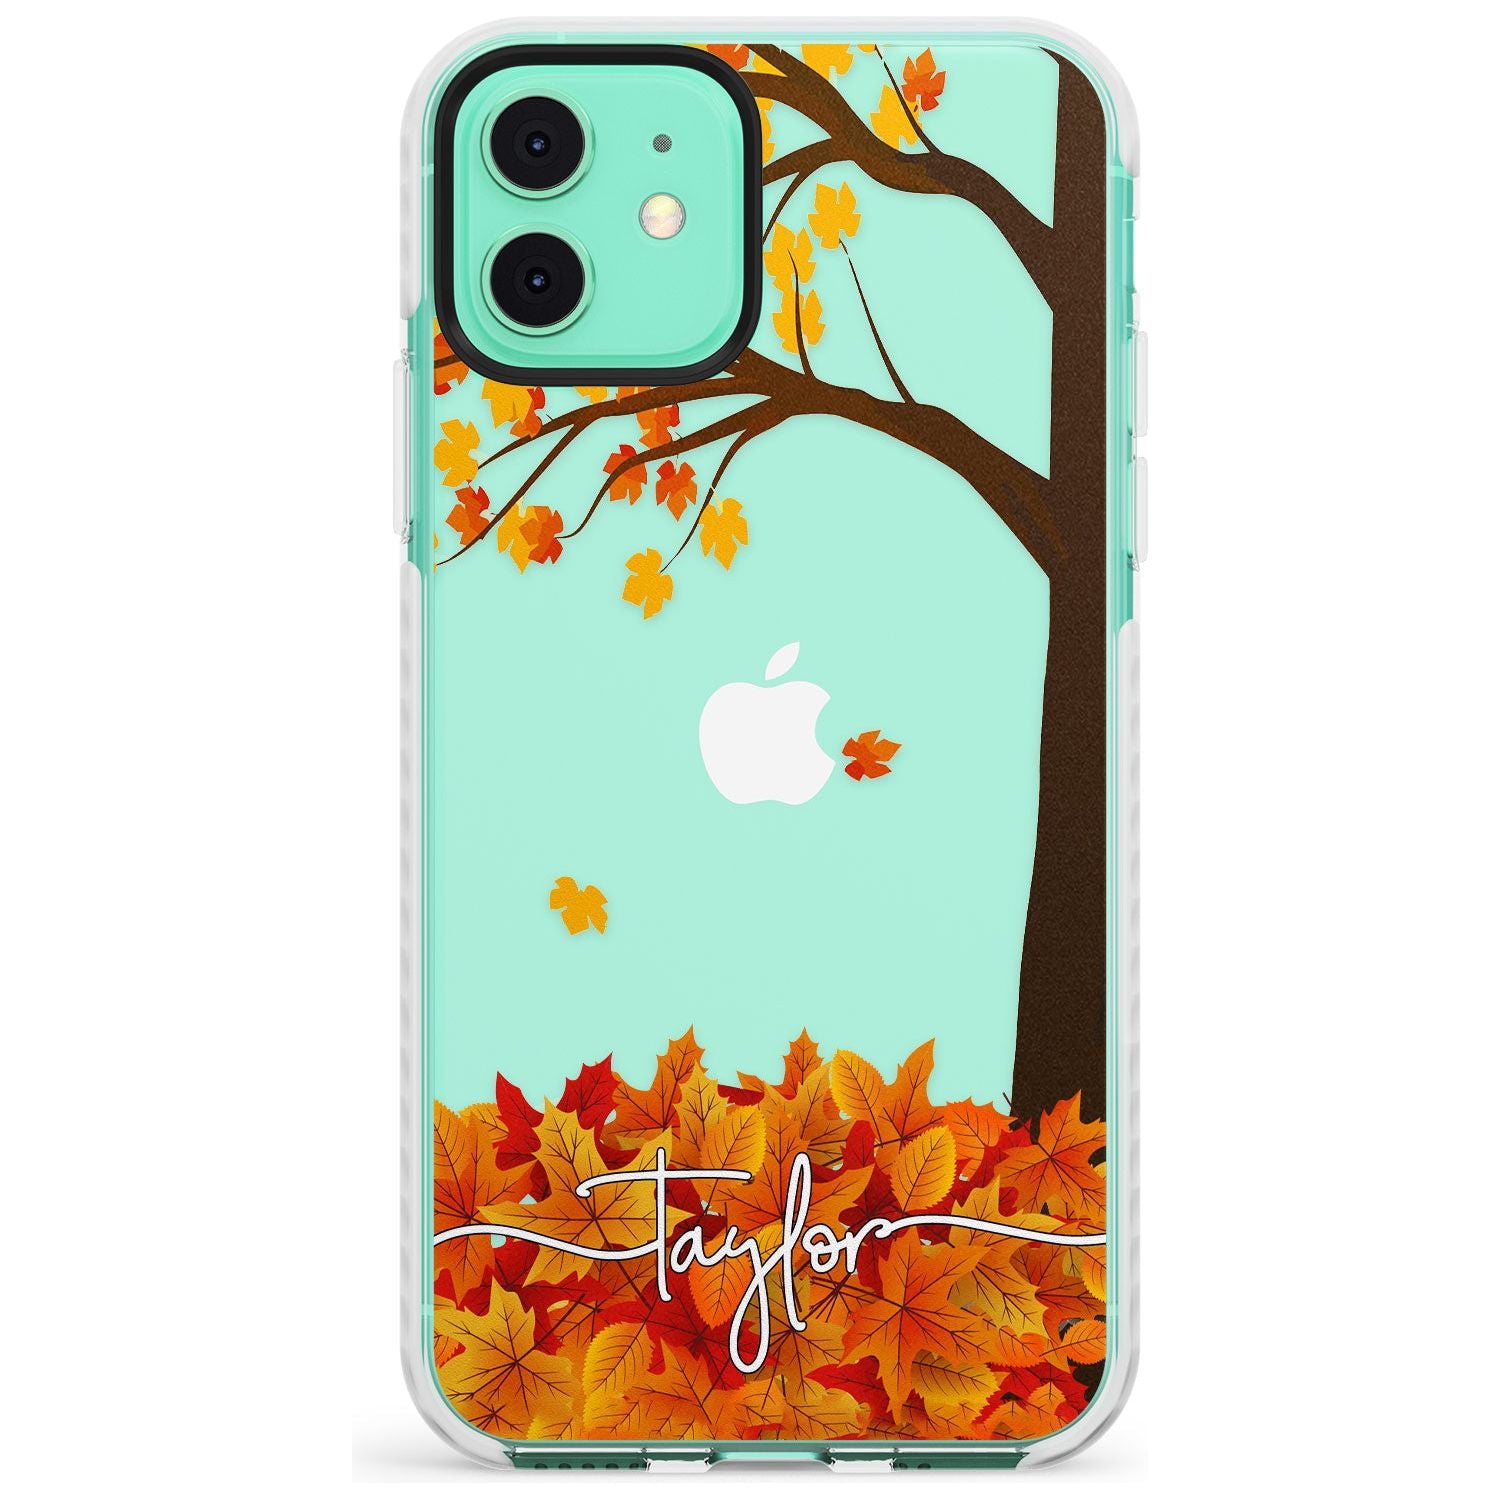 Personalised Autumn Leaves Impact Phone Case for iPhone 11